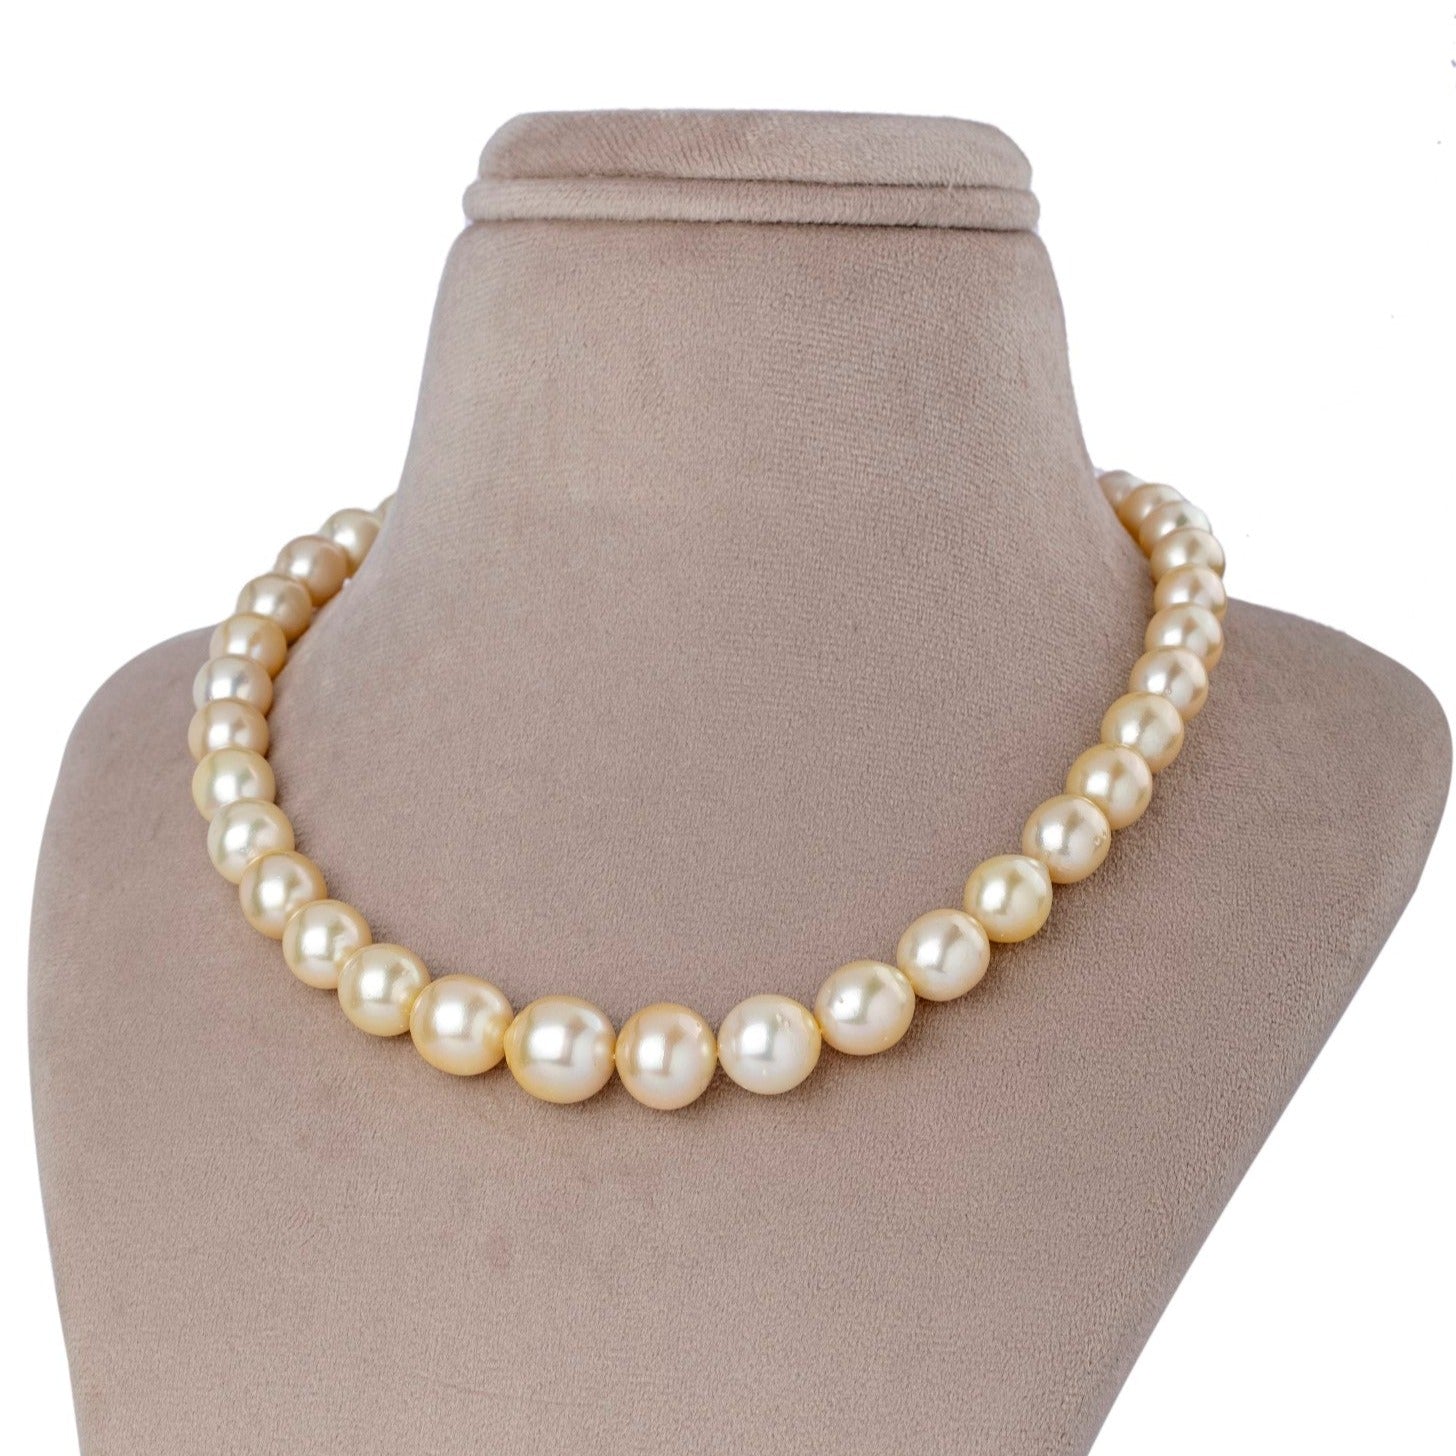 Lustrous Harmony South Sea Golden Pearl Necklace